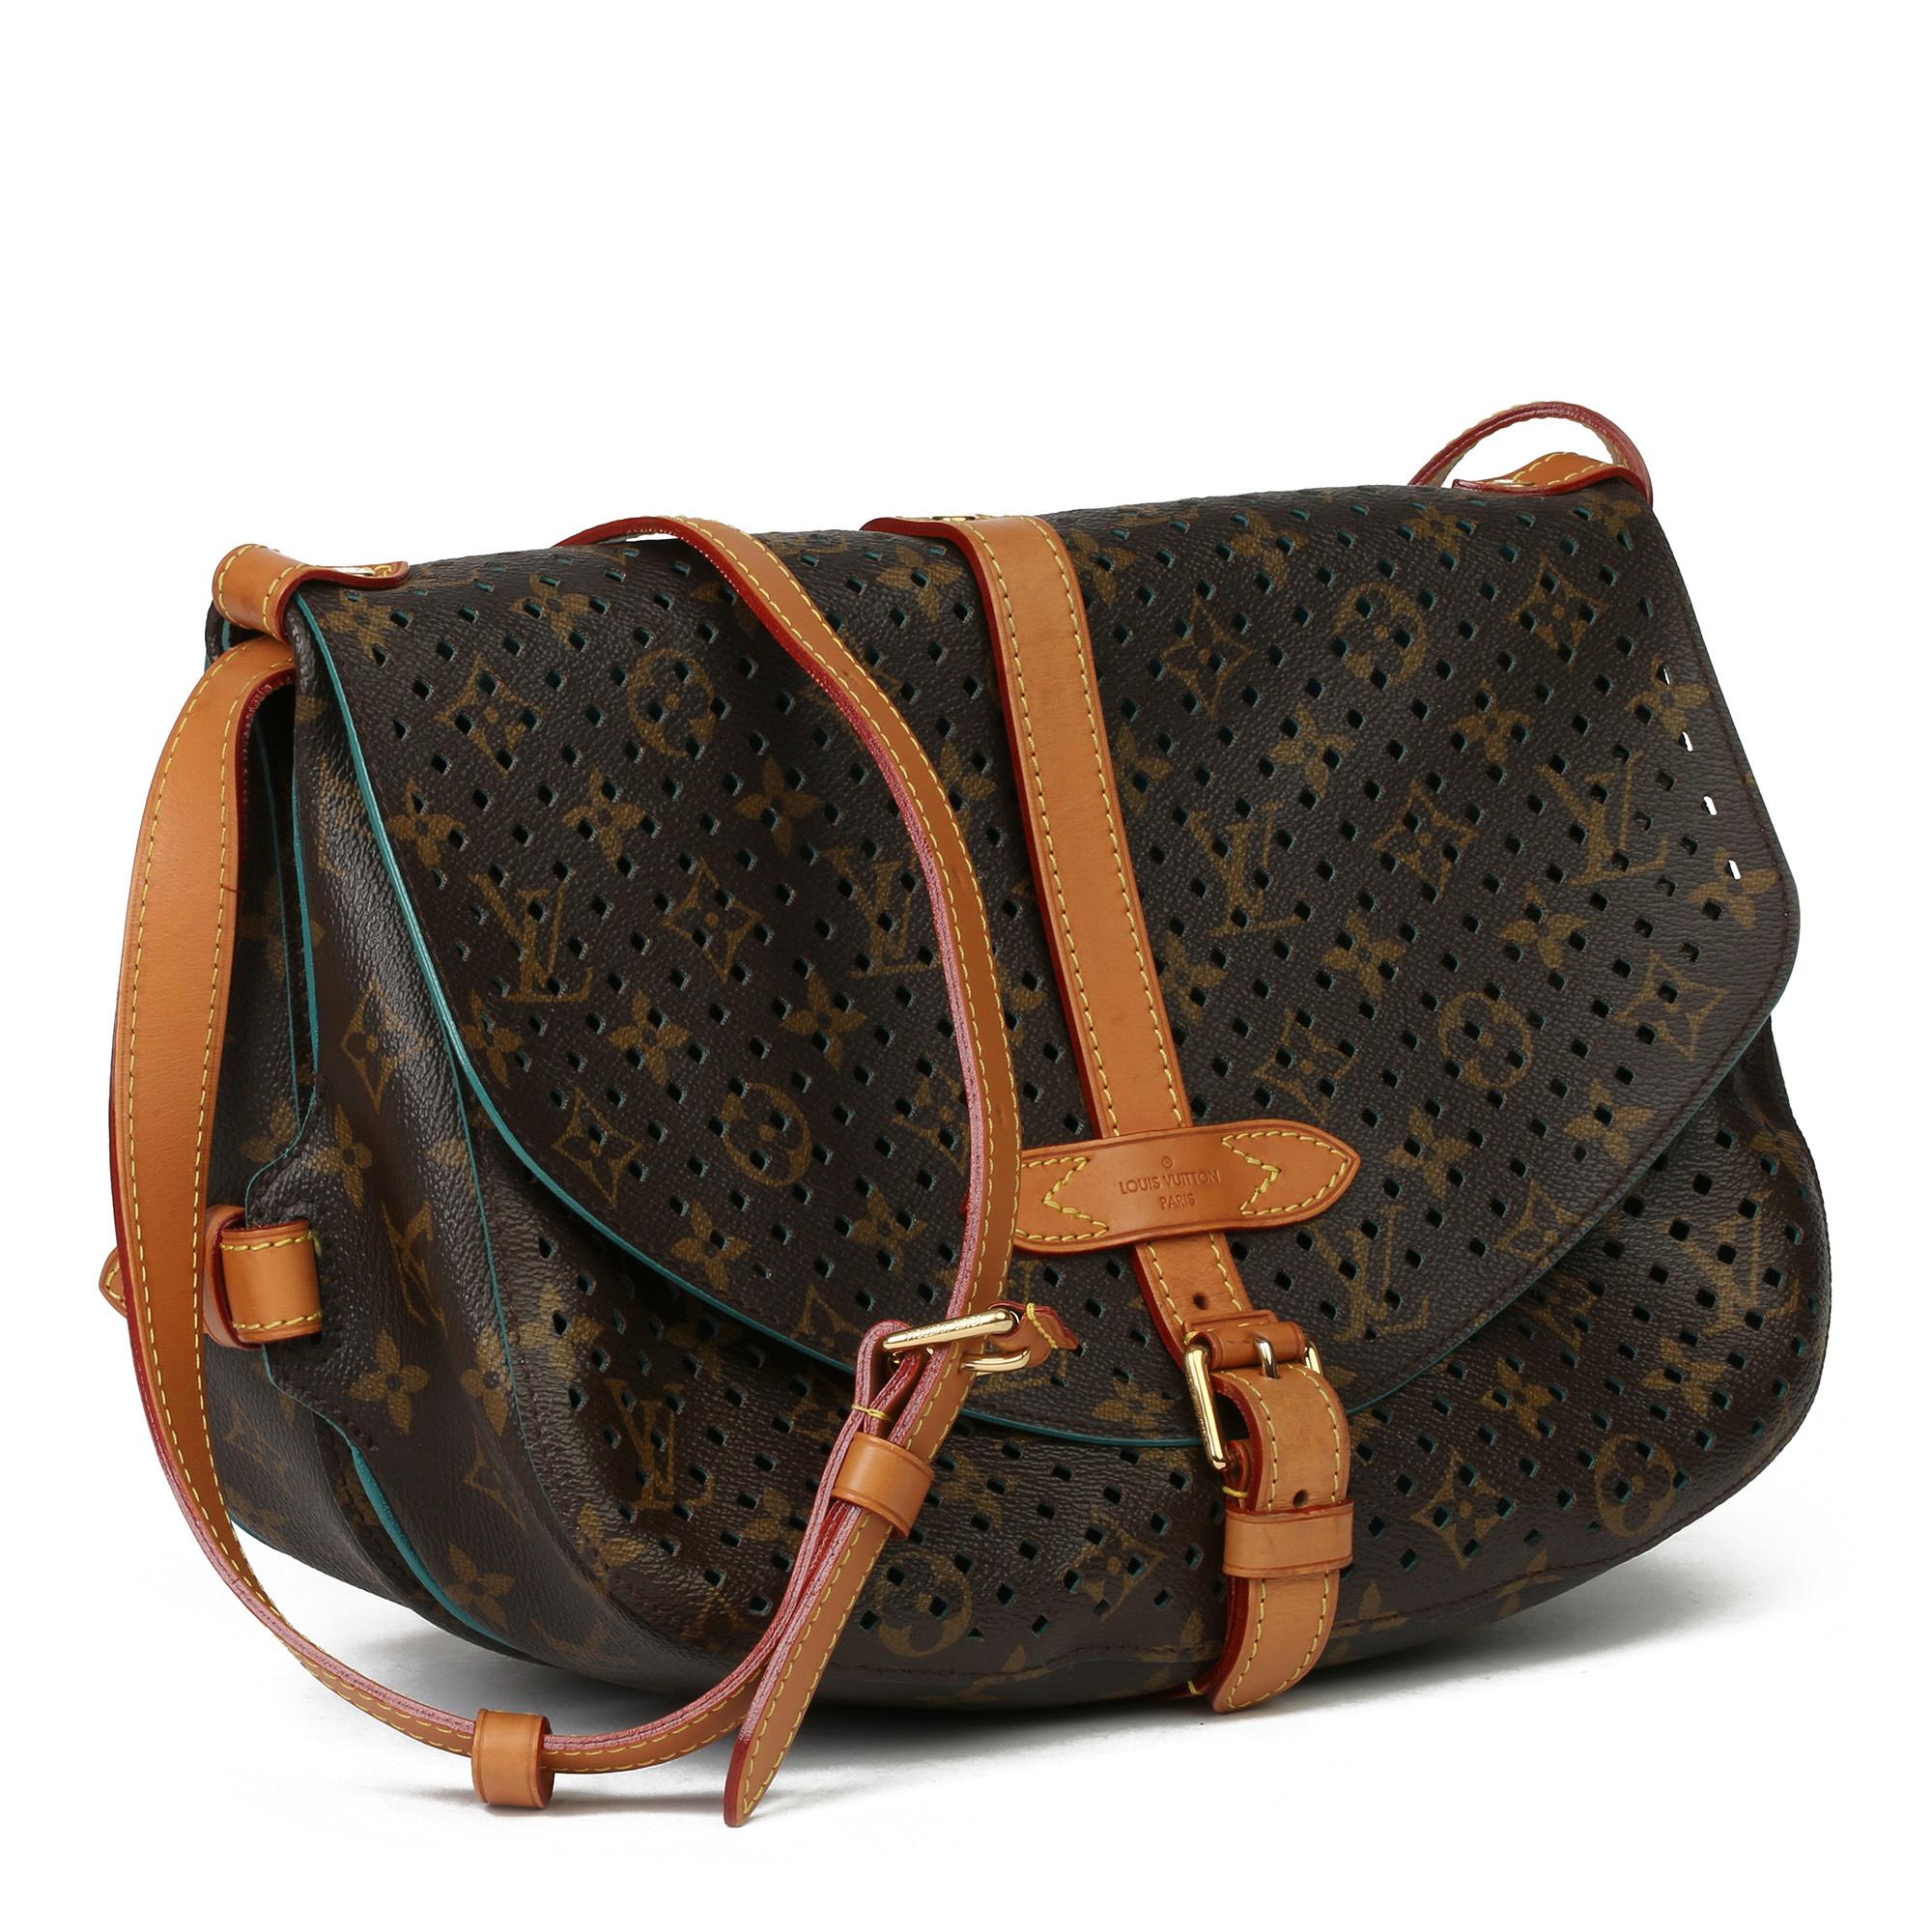 LOUIS VUITTON
Brown Perforated Monogram Coated Canvas & Vachetta Leather Teal Saumur 30

Xupes Reference: HB3949
Serial Number: TJ4181
Age (Circa): 2011
Authenticity Details: Date Stamp (Made in France)
Gender: Ladies
Type: Shoulder,